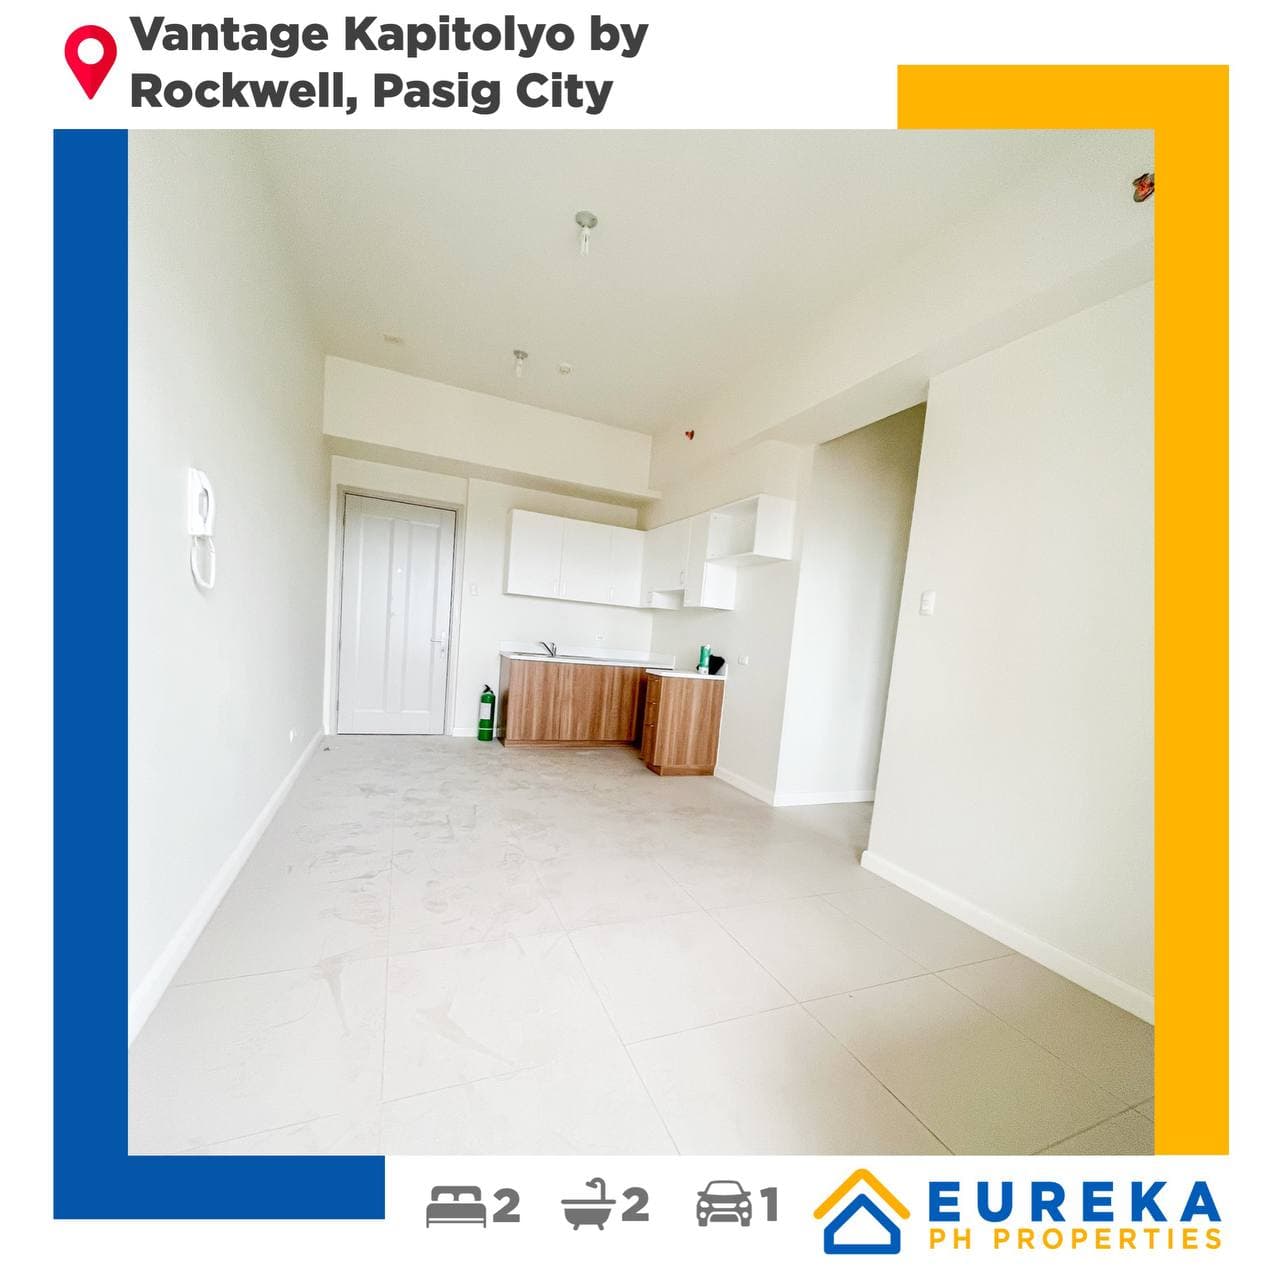 Brand New 2BR 60 sqm unit w/parking at Vantage Kapitolyo by Rockwell, Pasig City.